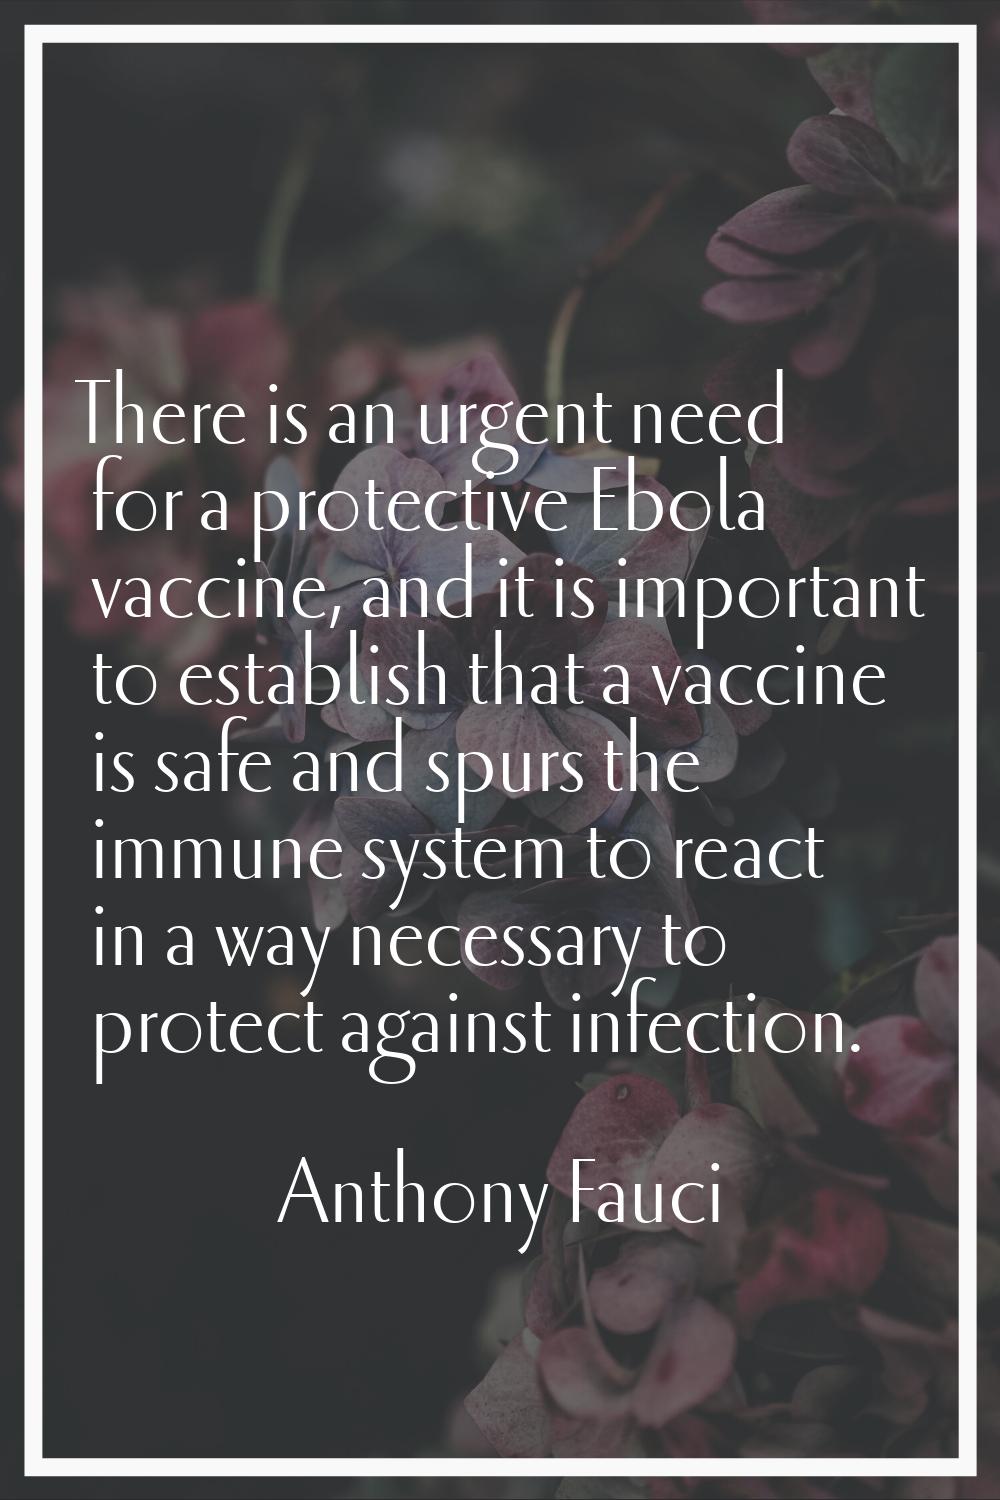 There is an urgent need for a protective Ebola vaccine, and it is important to establish that a vac